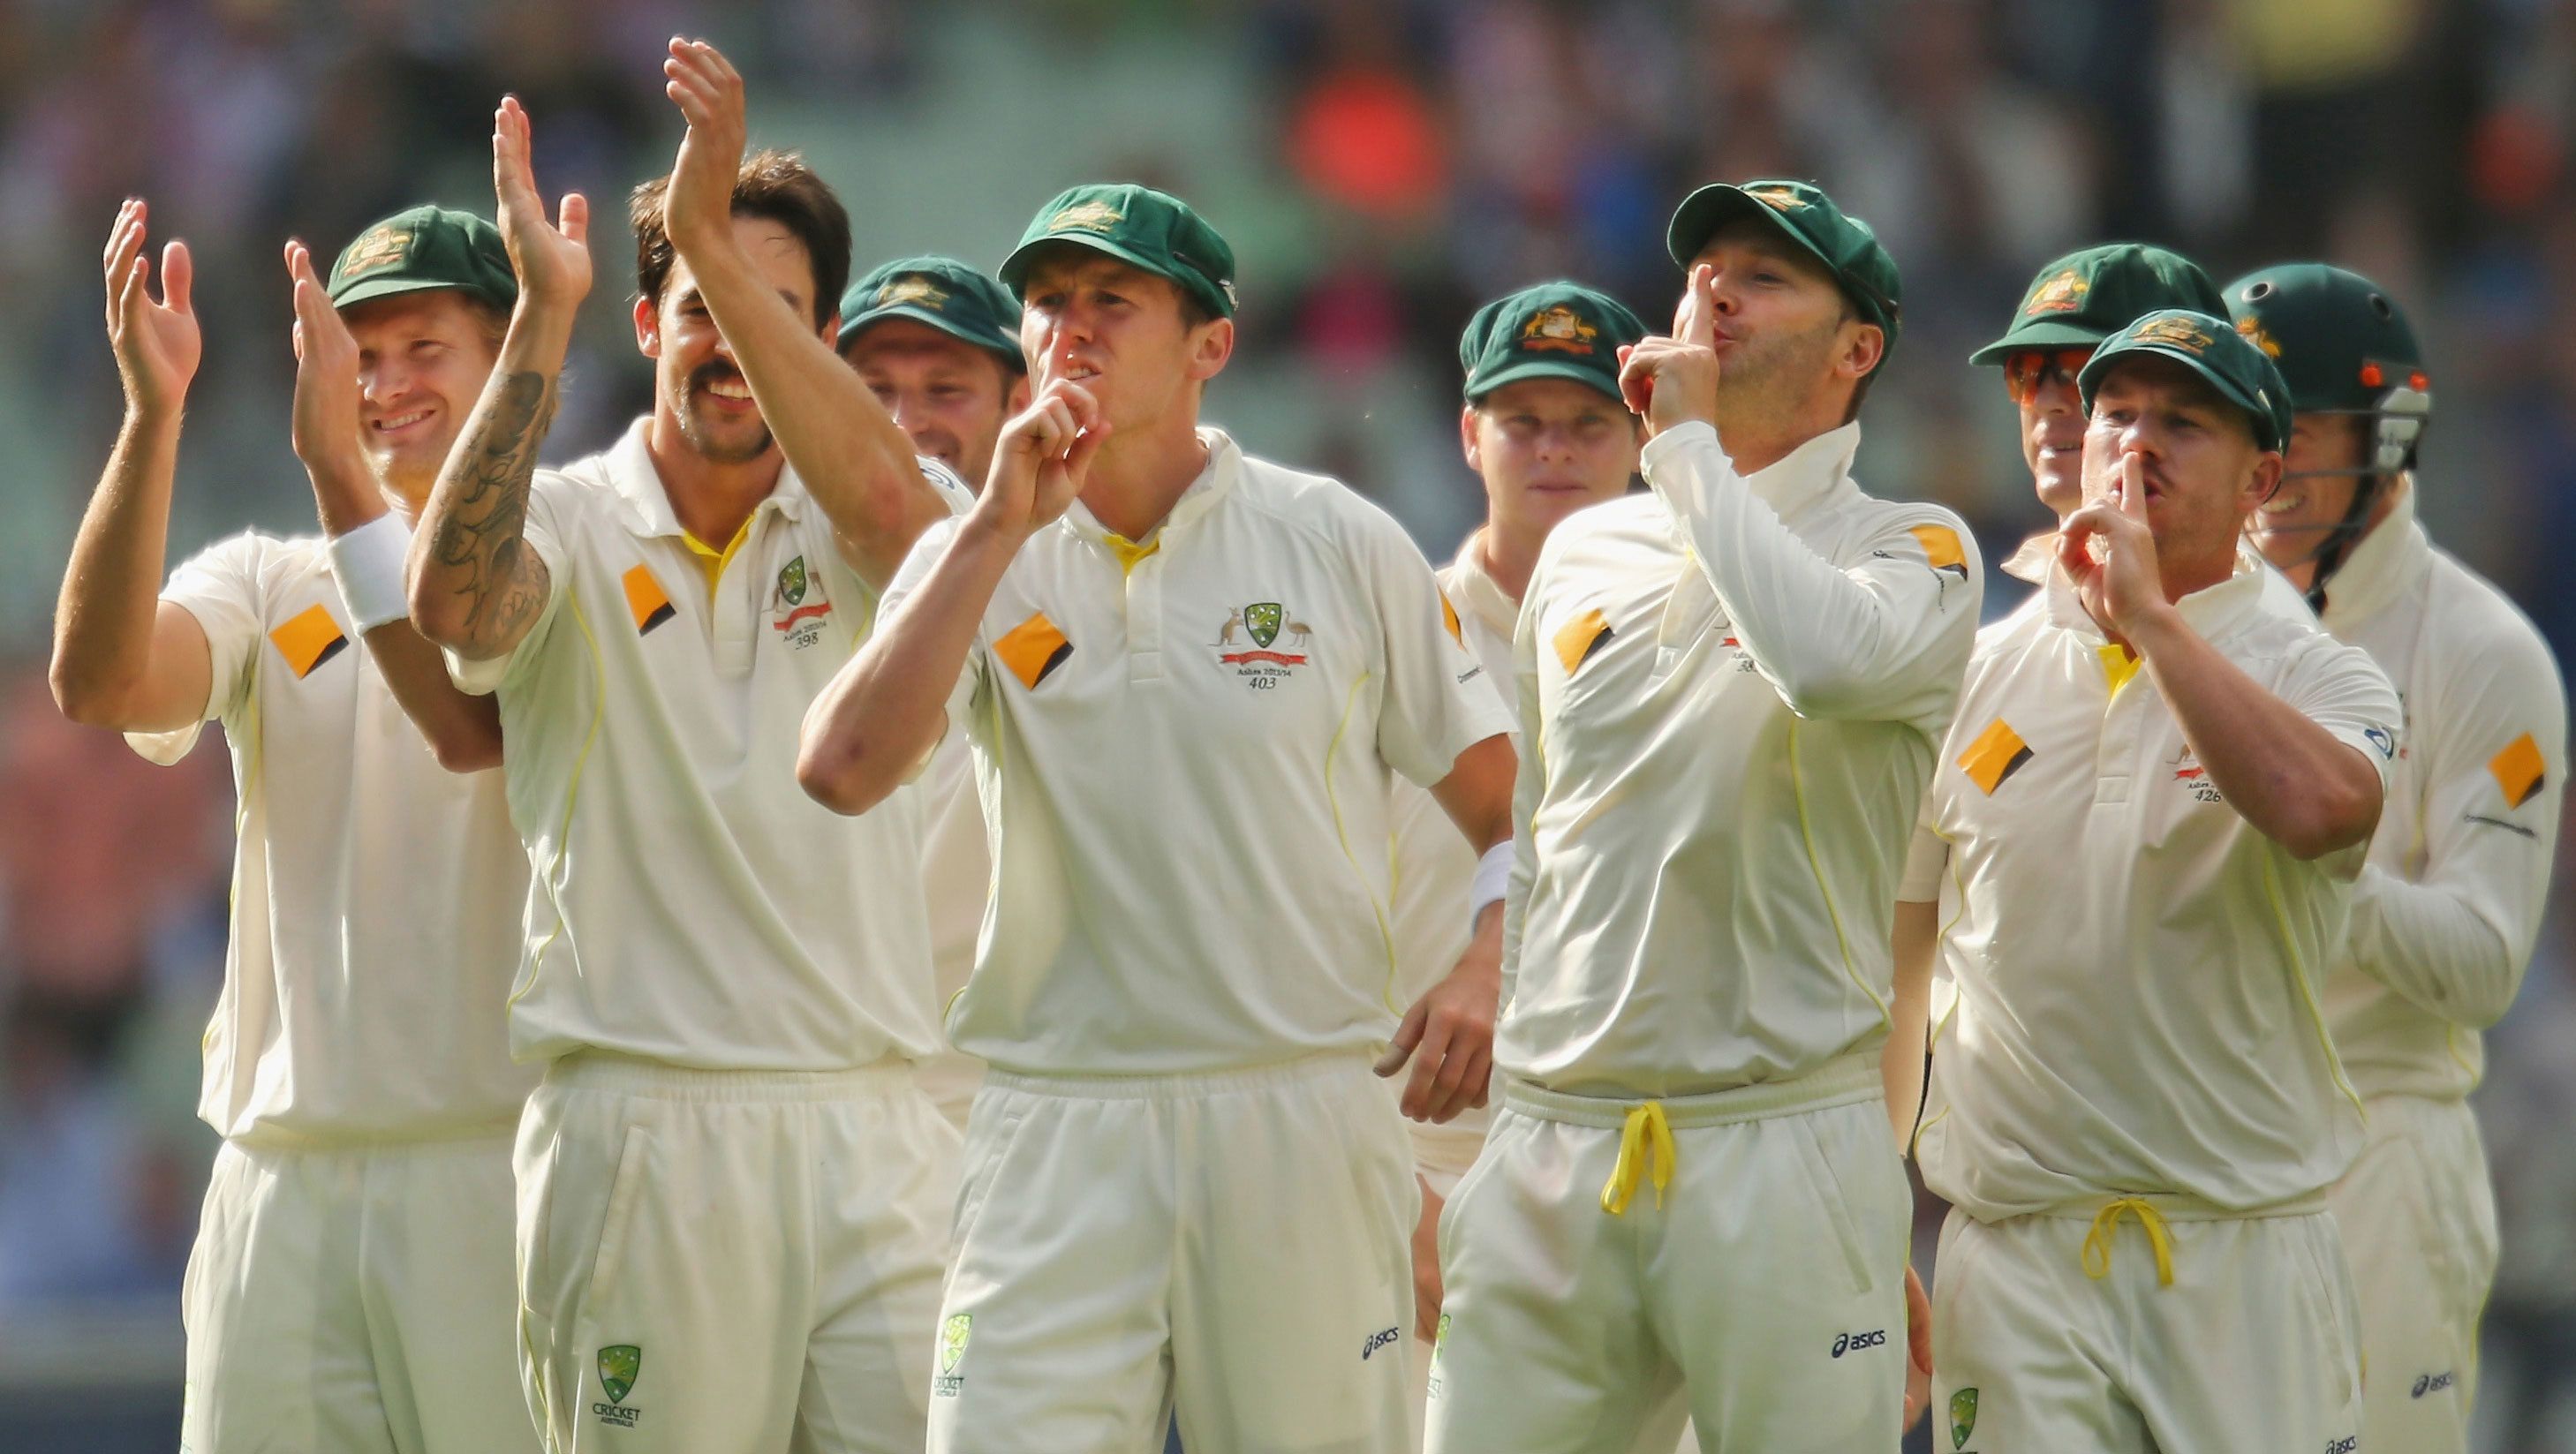 Mitchell Johnson (second from left) applauds as David Warner (far right) and teammates shoosh the Barmy Army during the 2013 Ashes series.